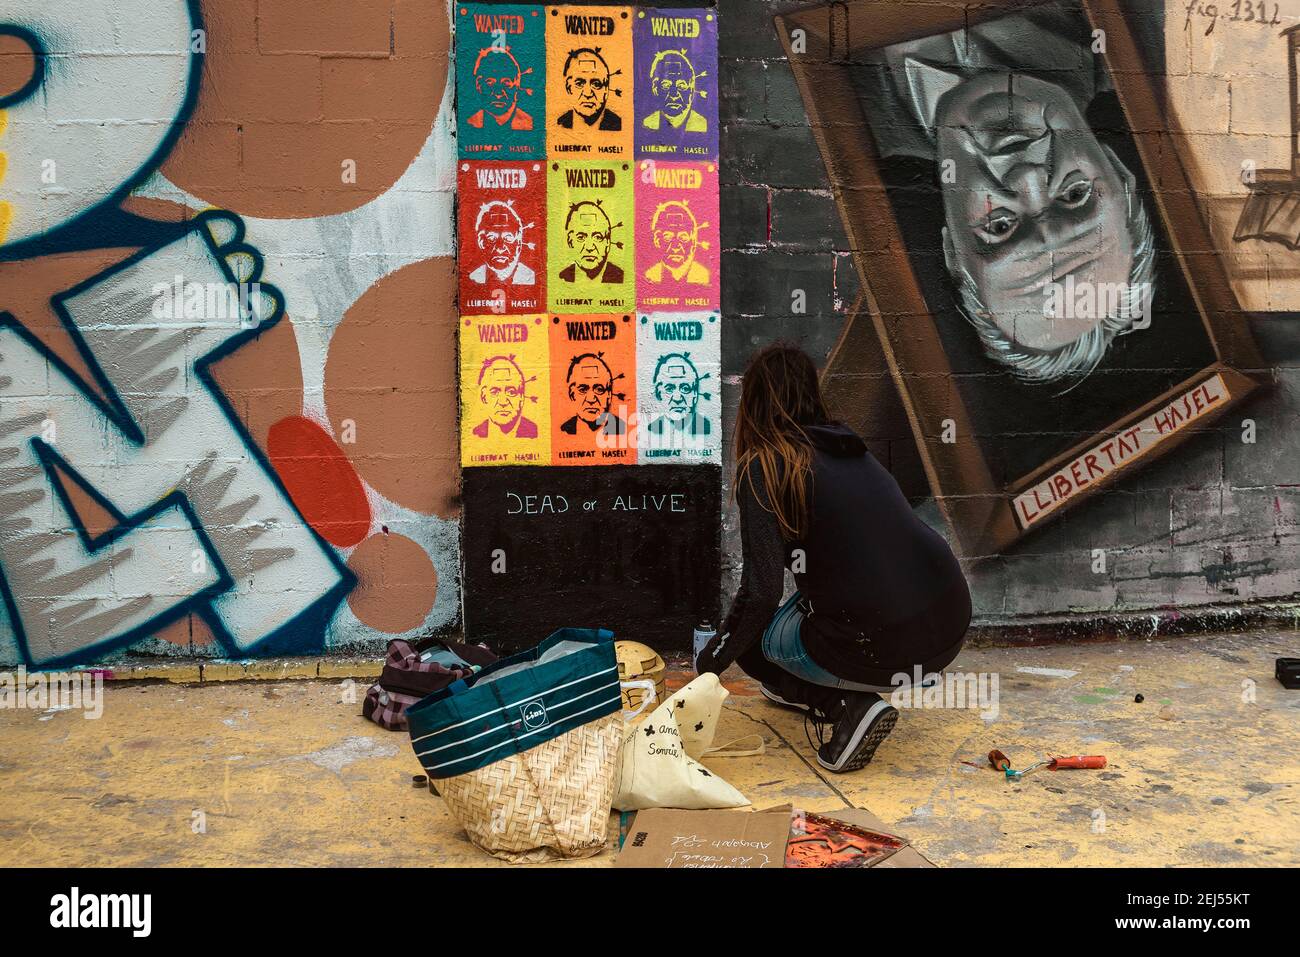 Barcelona, Spain. 21st Feb, 2021. A street artist paints graffiti criticizing Spain's monarchy in support of imprisoned rap artist Pablo Hasel. convicted to jail for glorifying terrorism and insulting Spain's former king in lyrics, after five nights of riots. Credit: Matthias Oesterle/Alamy Live News Stock Photo